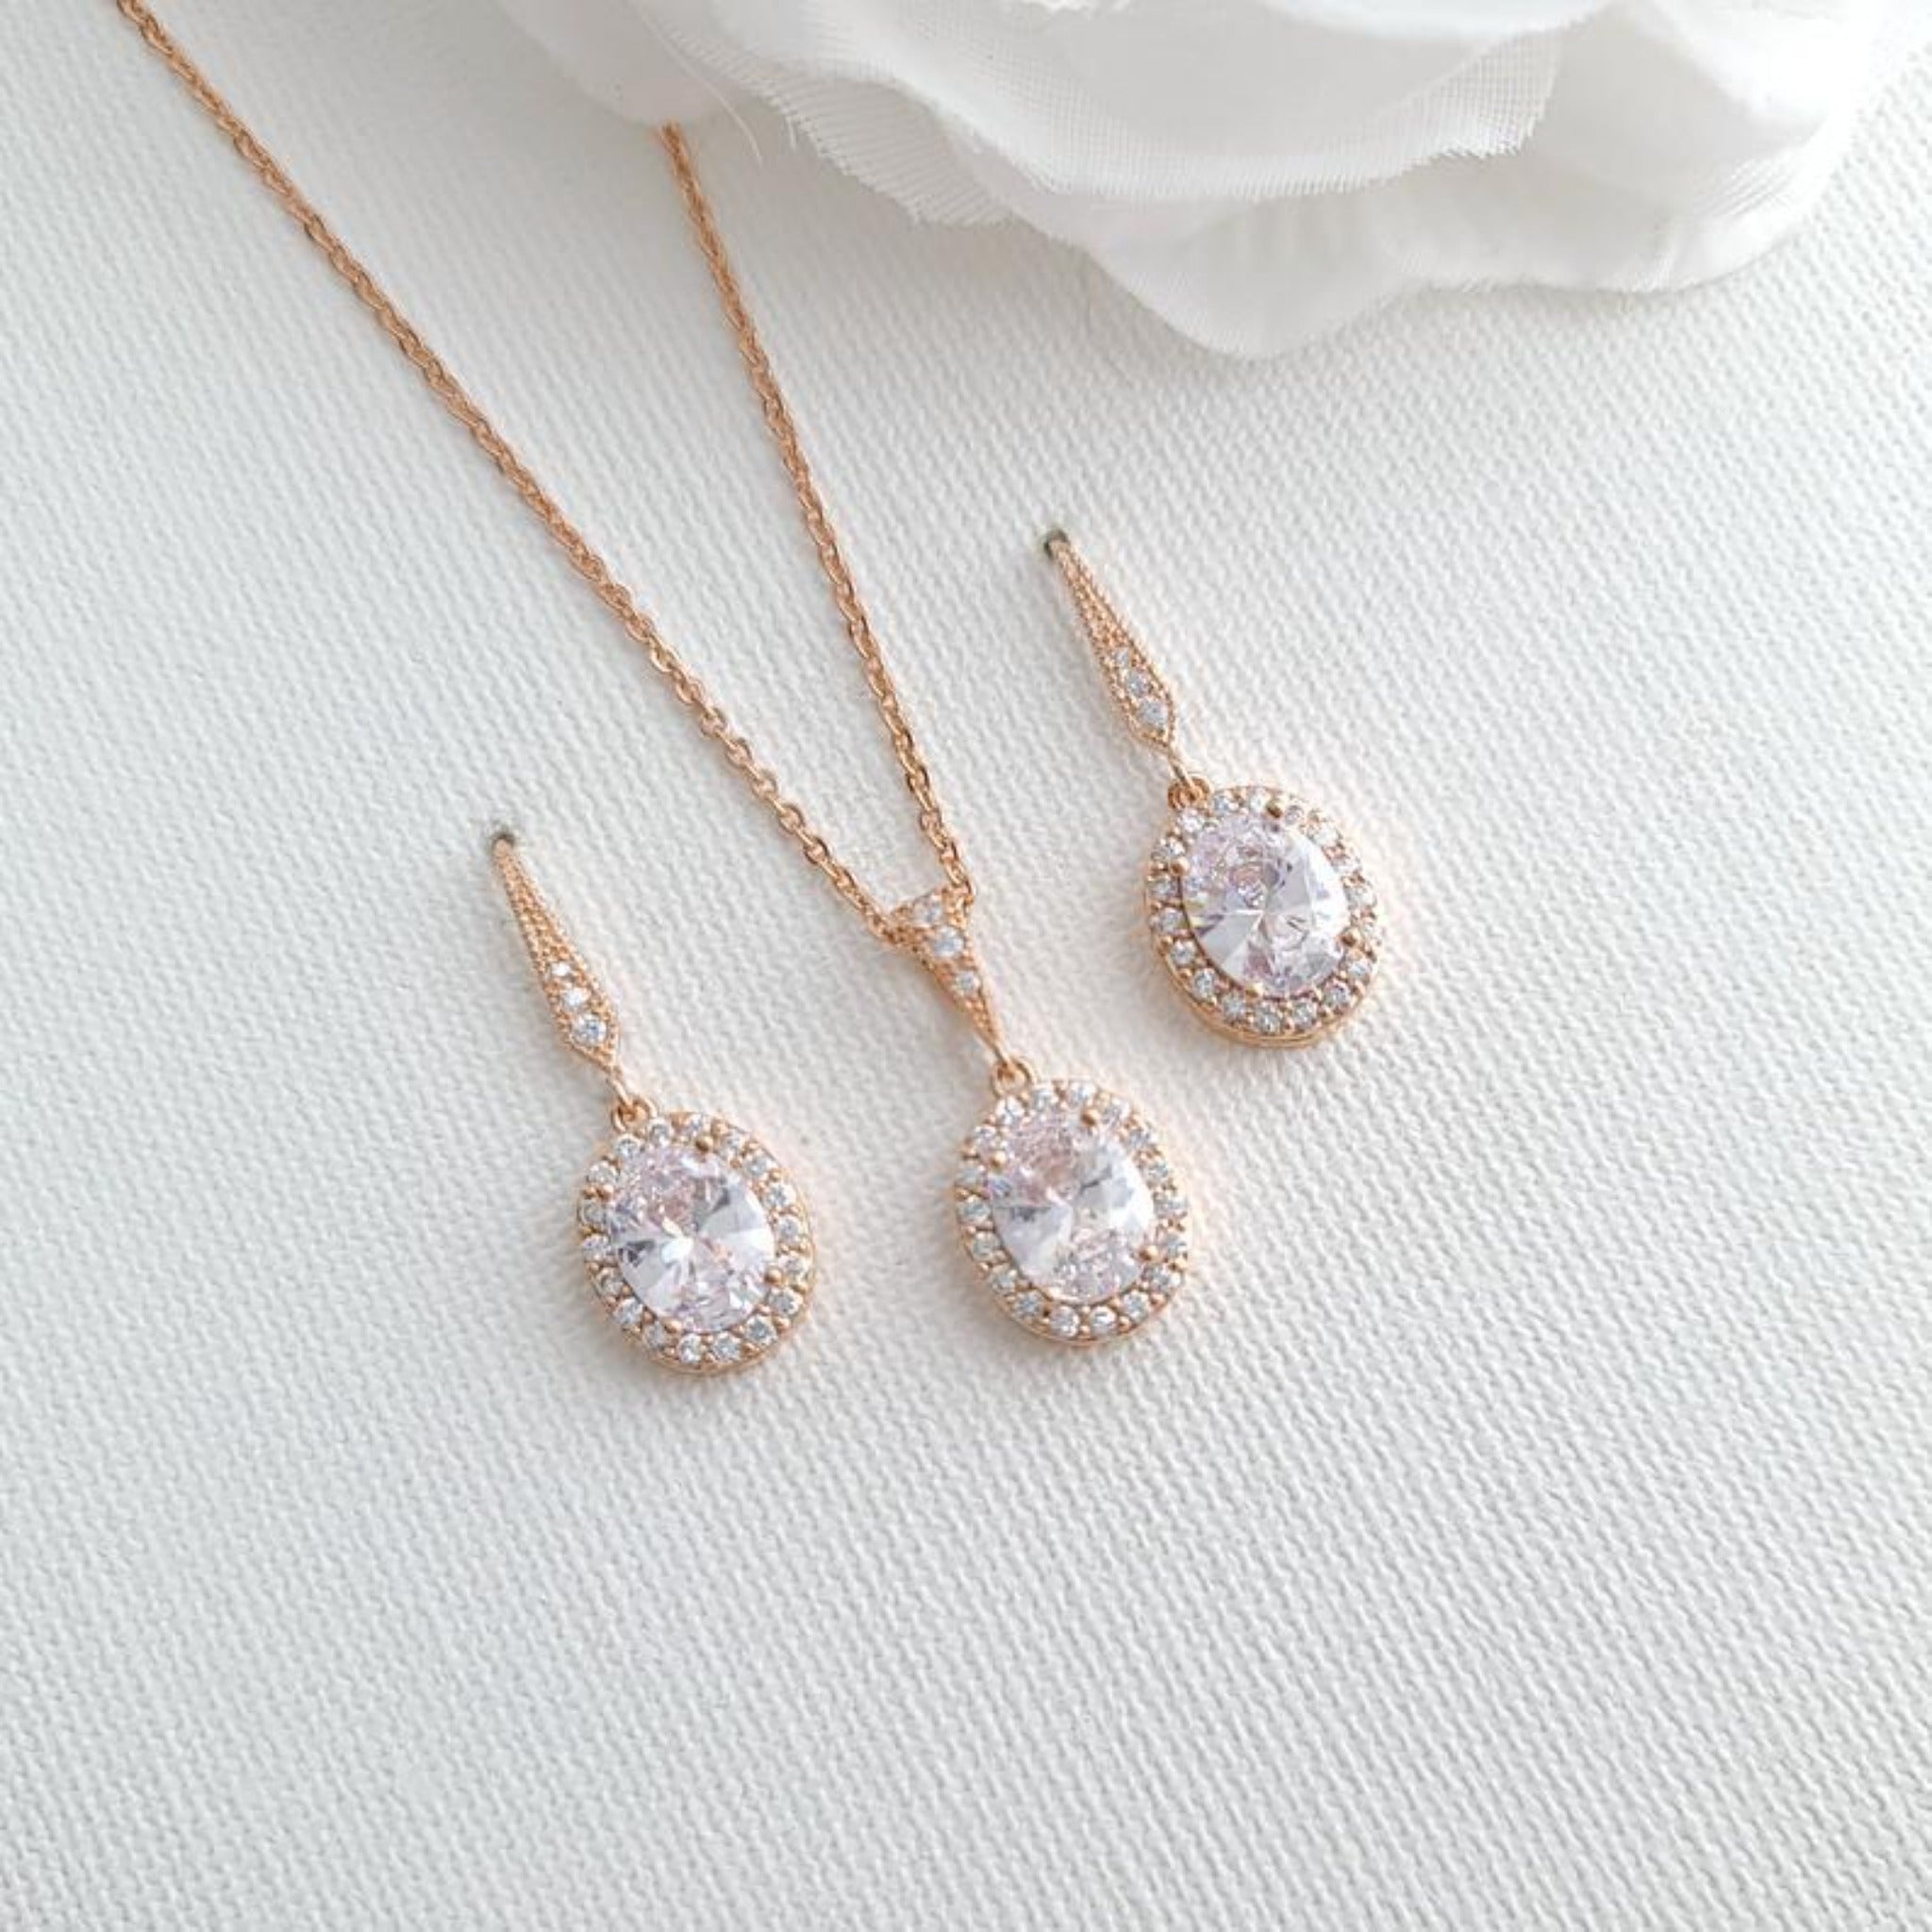 Bridal Jewelry Set, Bridesmaid Jewelry Set, Silver Plated Leaf Flower  Crystal Backdrop Necklace Set, Bridal V Shape Necklace and Earring Set -  Etsy